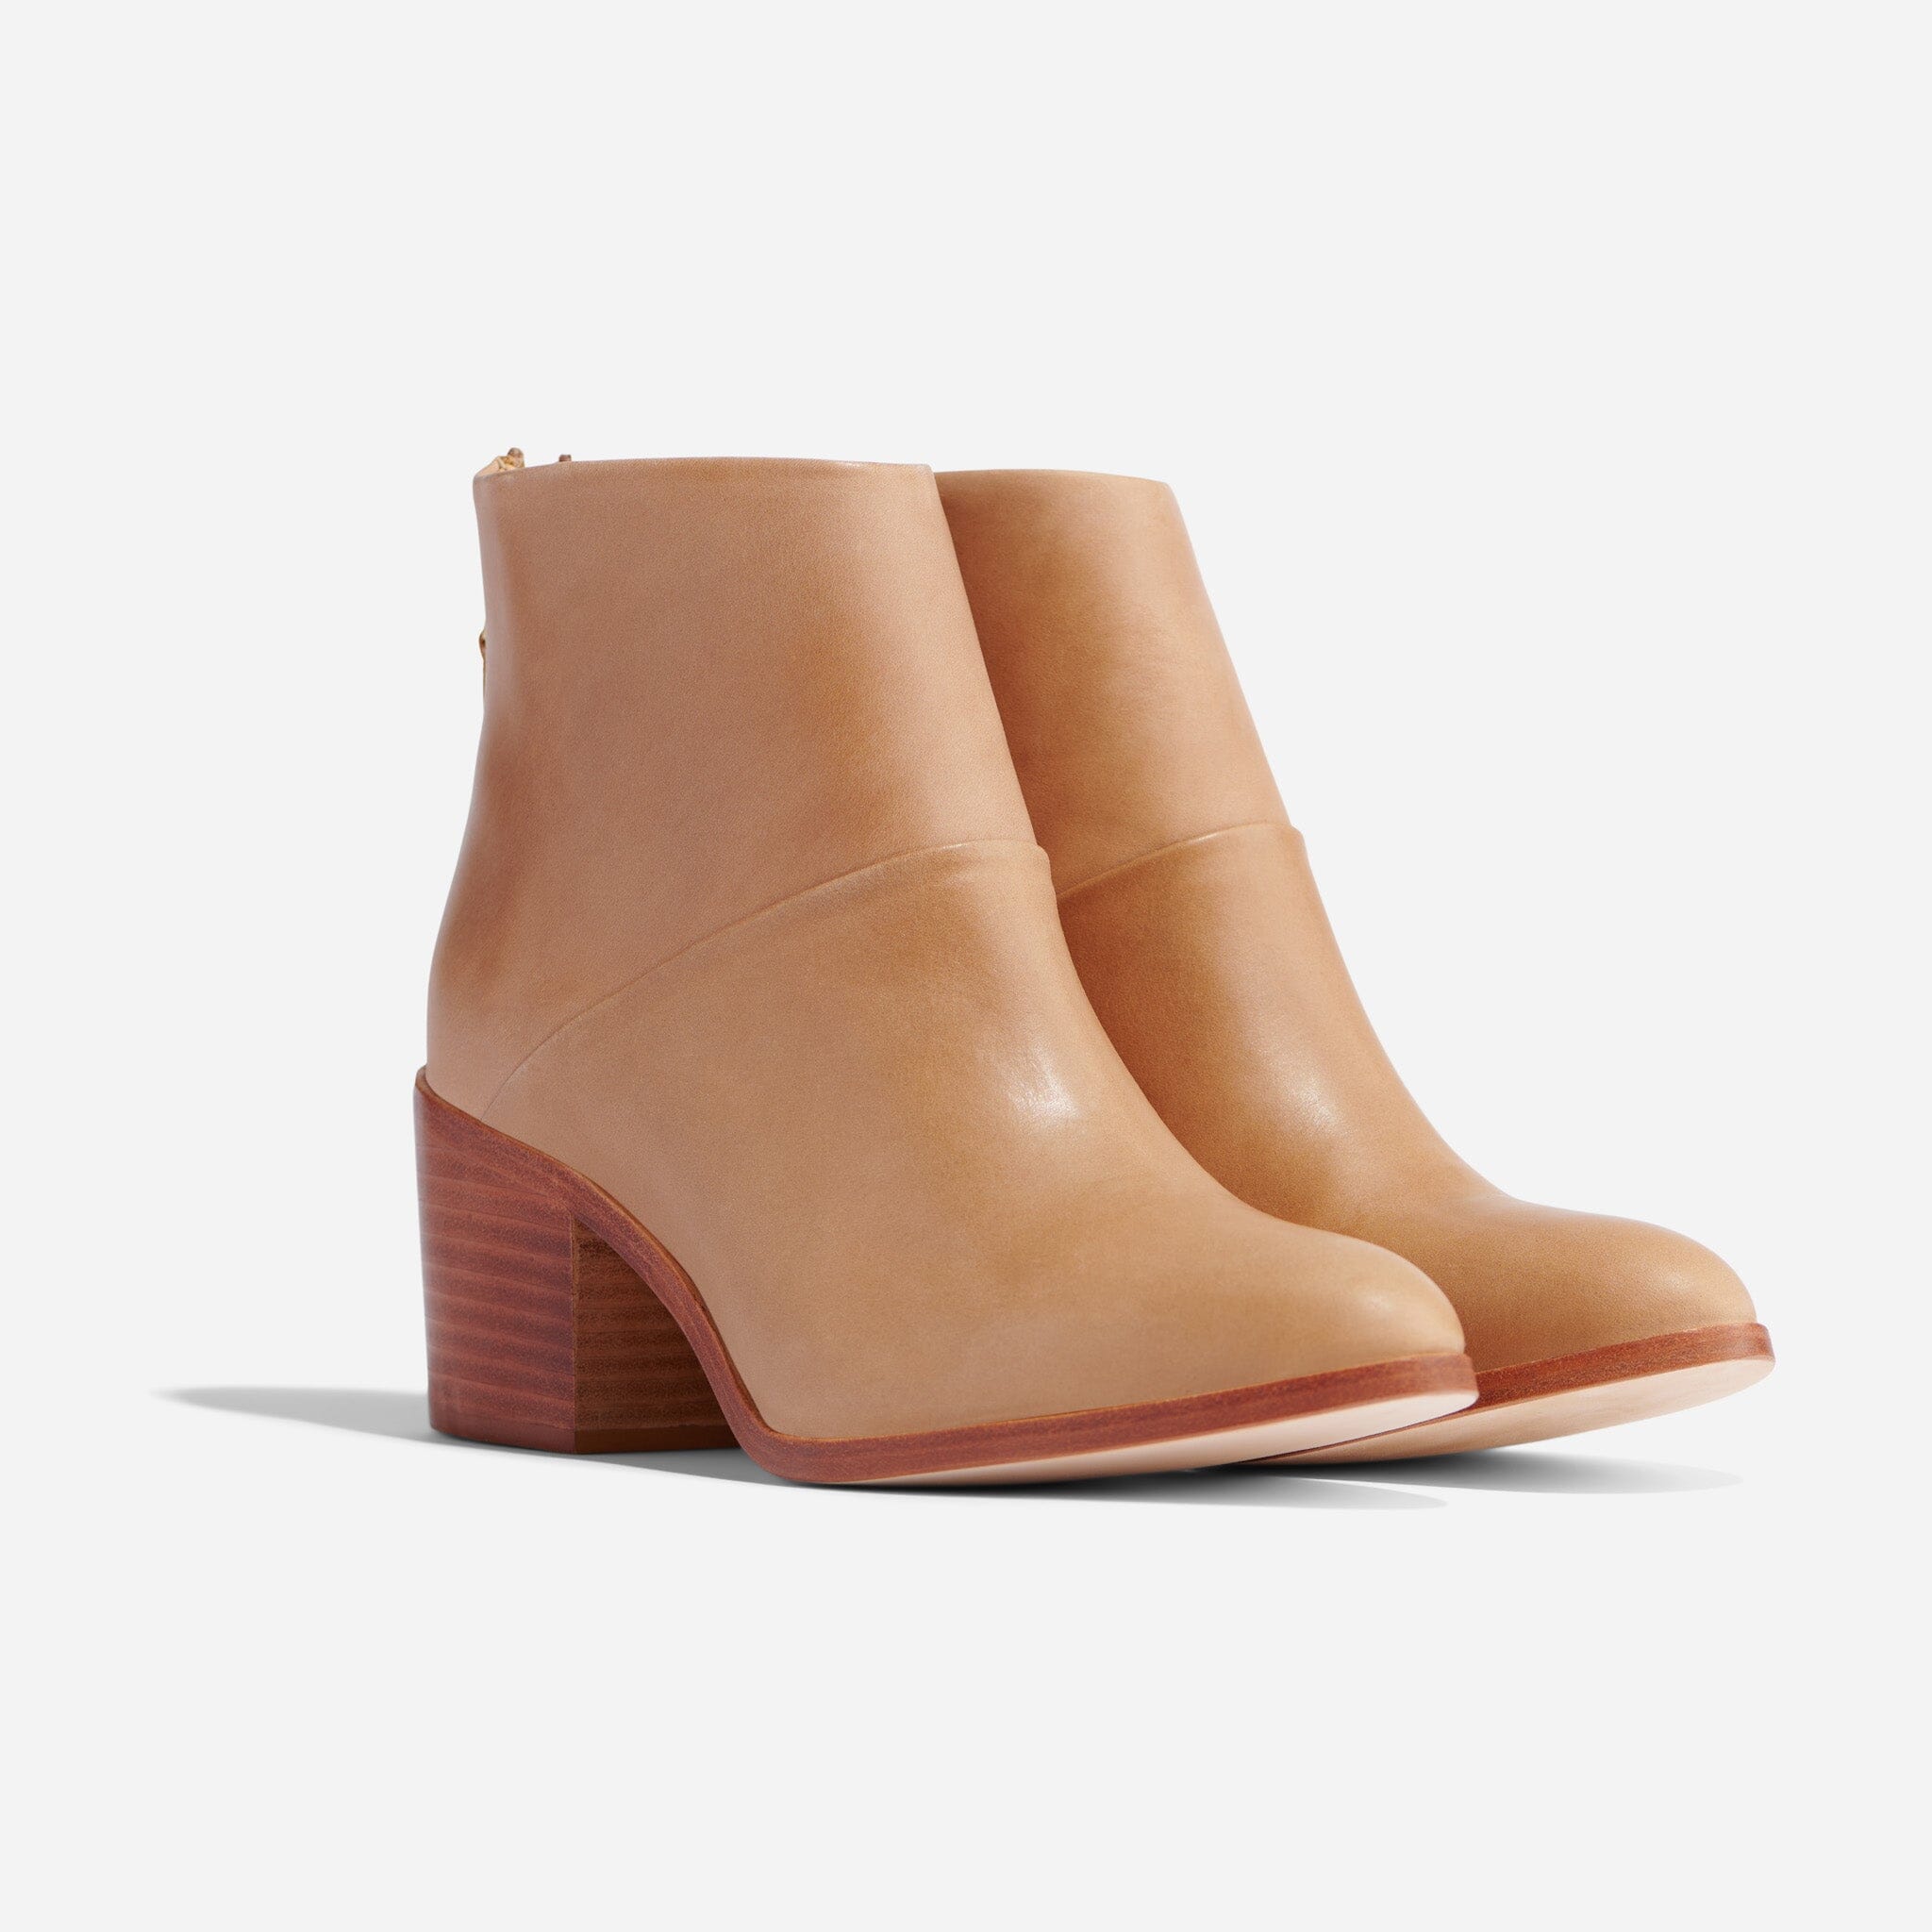 Sam Edelman Usha Ankle Bootie | Women's Boots and Booties